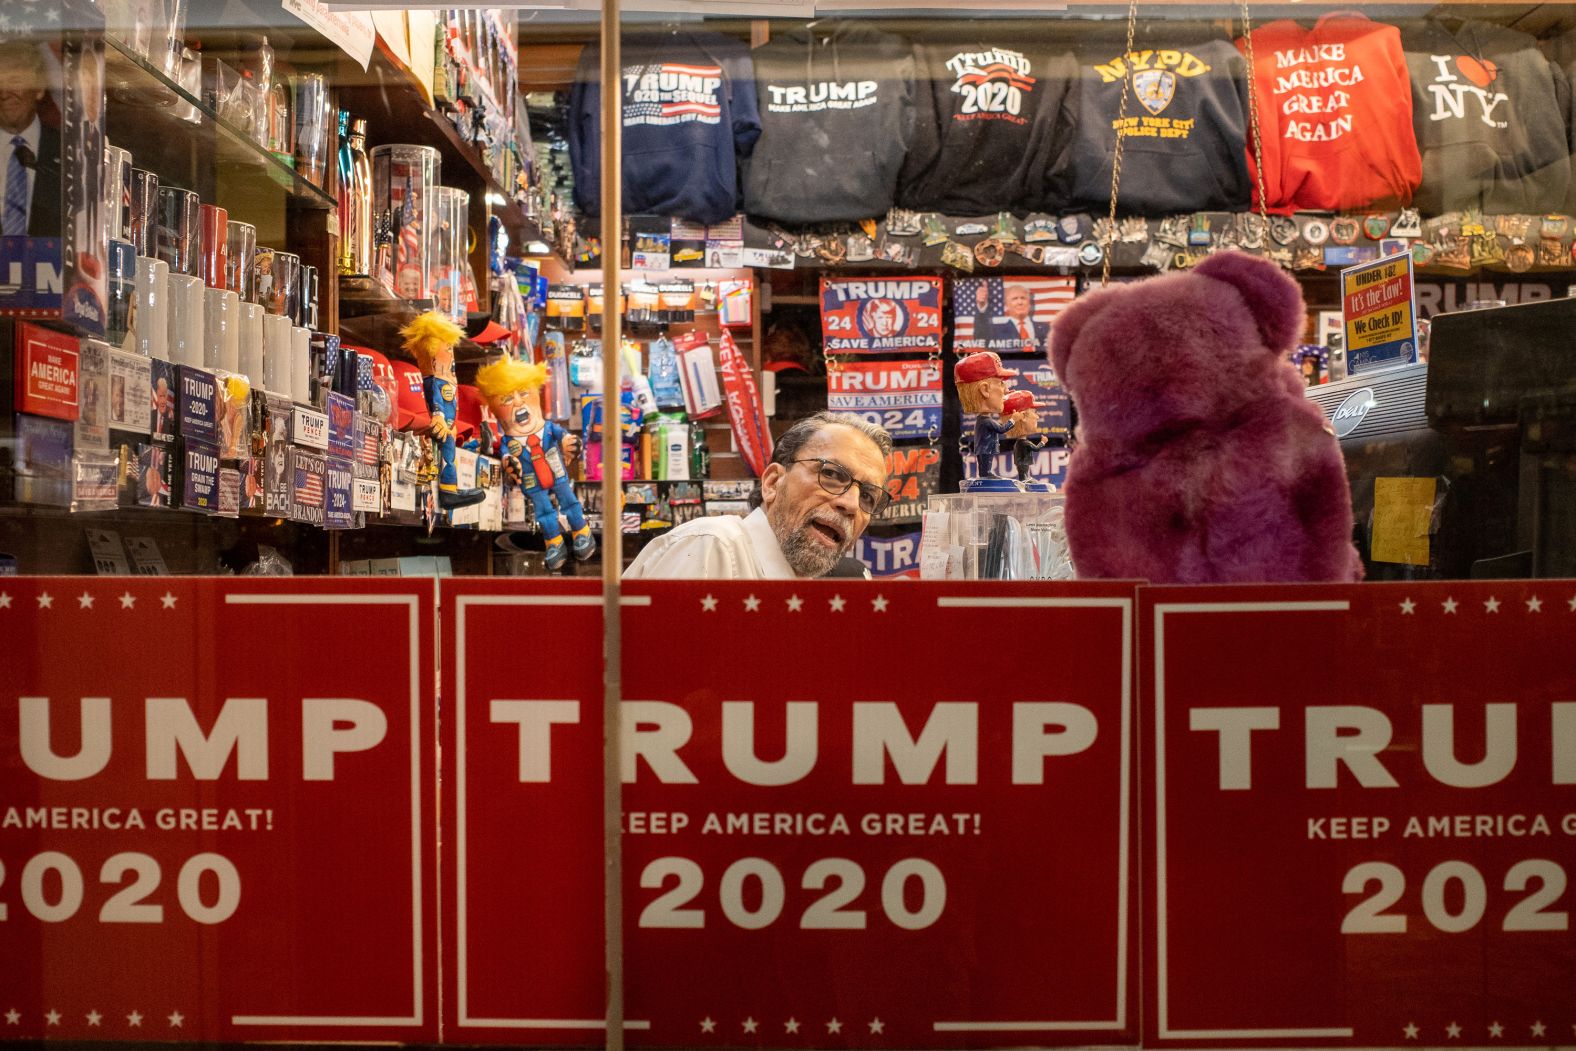 An employee is seen behind the counter at the Trump Tower gift shop in New York on March 21.